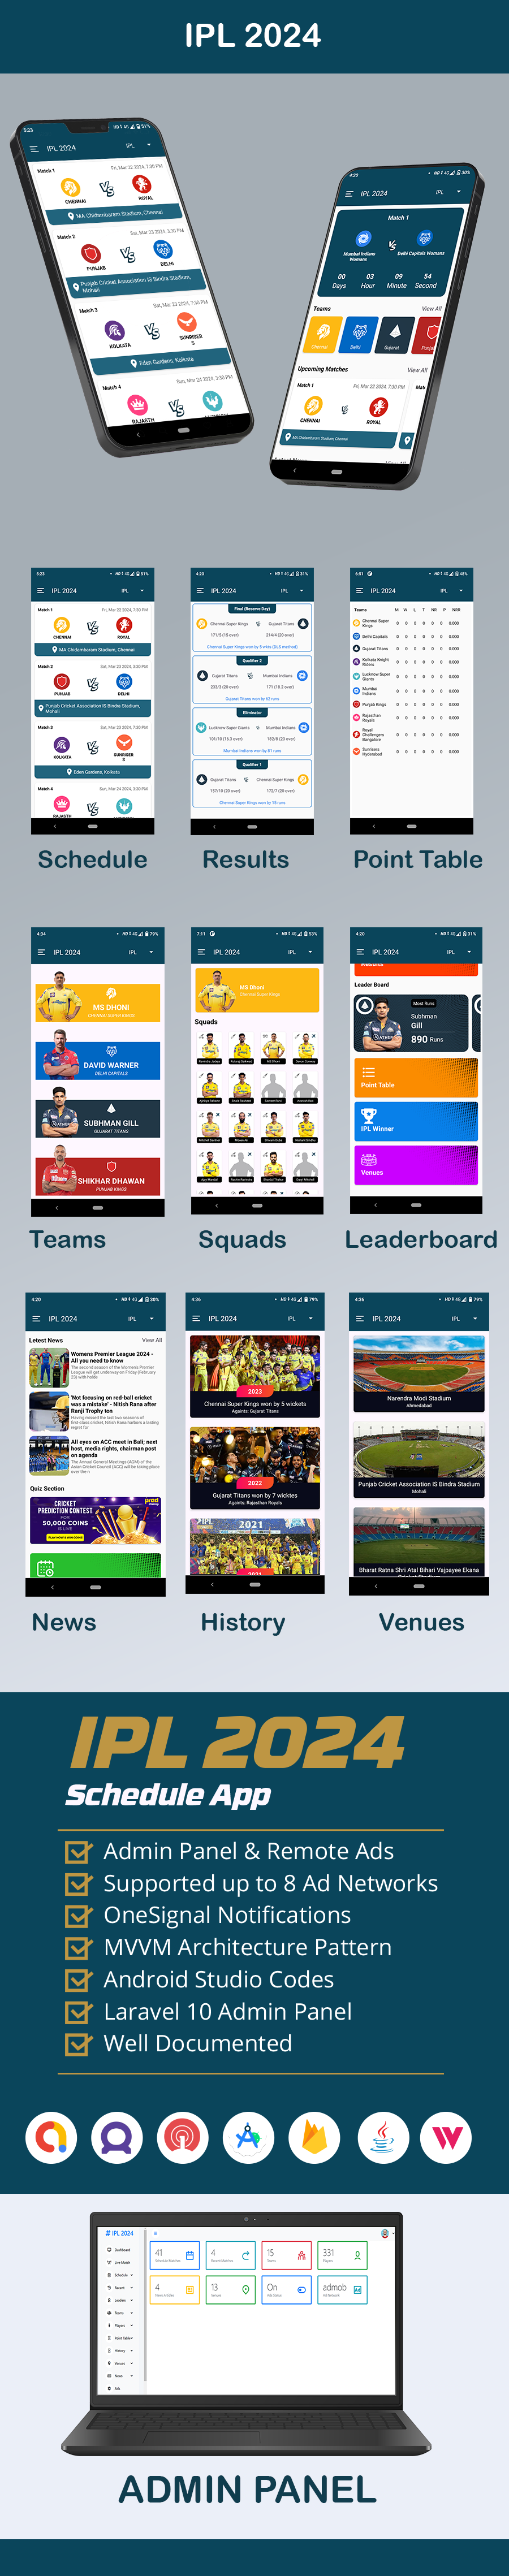 IPL 2024 Schedule - Android App with Admin Panel - 1